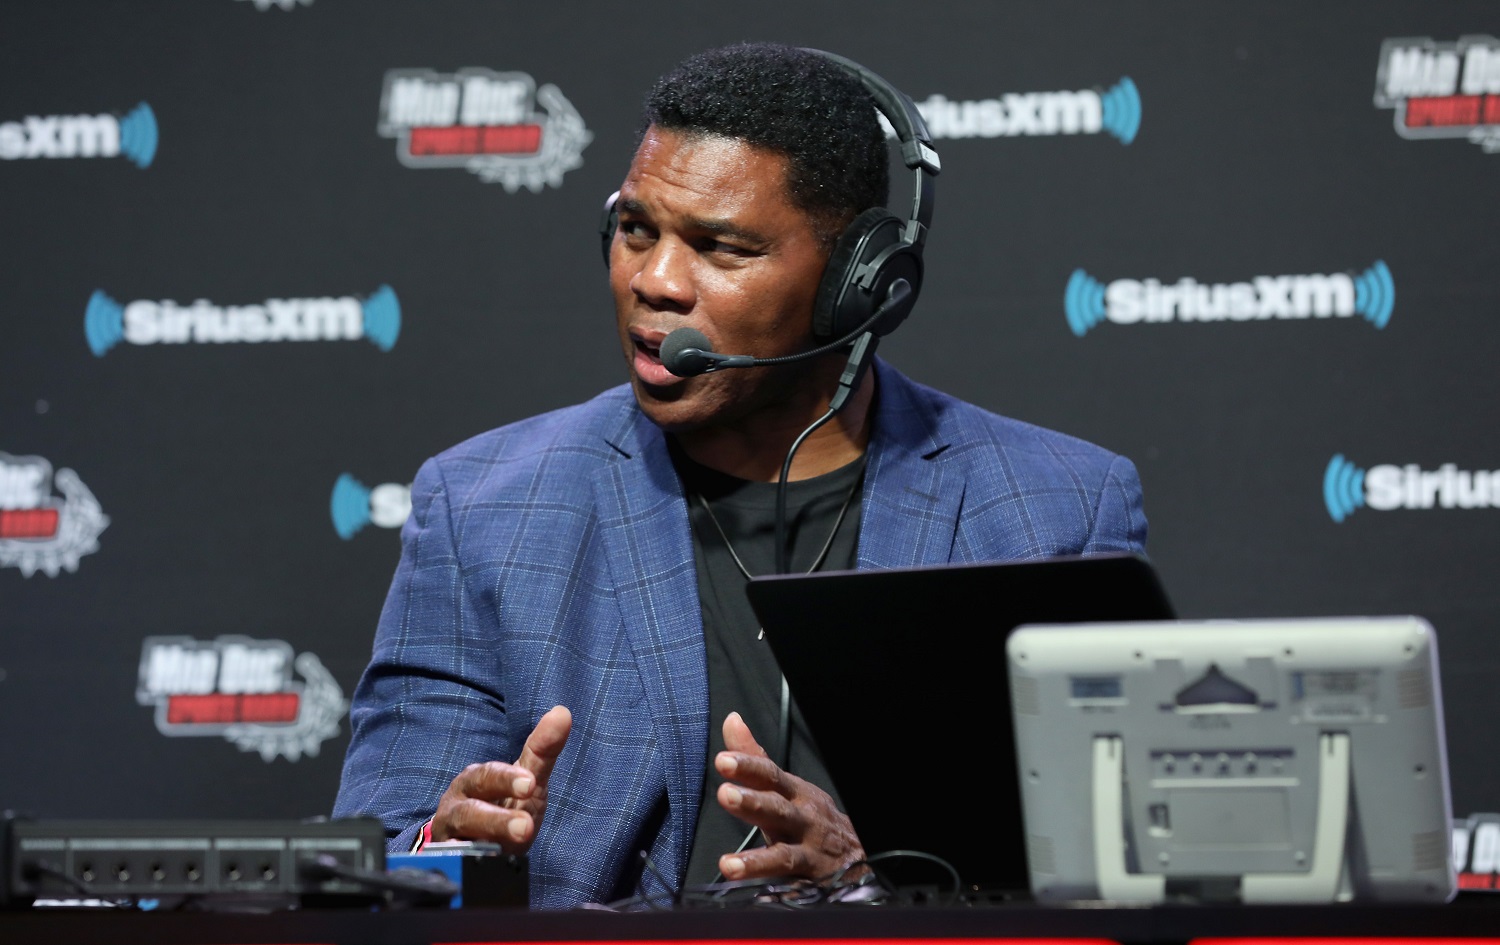 Retired college and pro football star Herschel Walker grew up in Georgia. He is considering a run for the U.S. Senate from the state. | Cindy Ord/Getty Images for SiriusXM